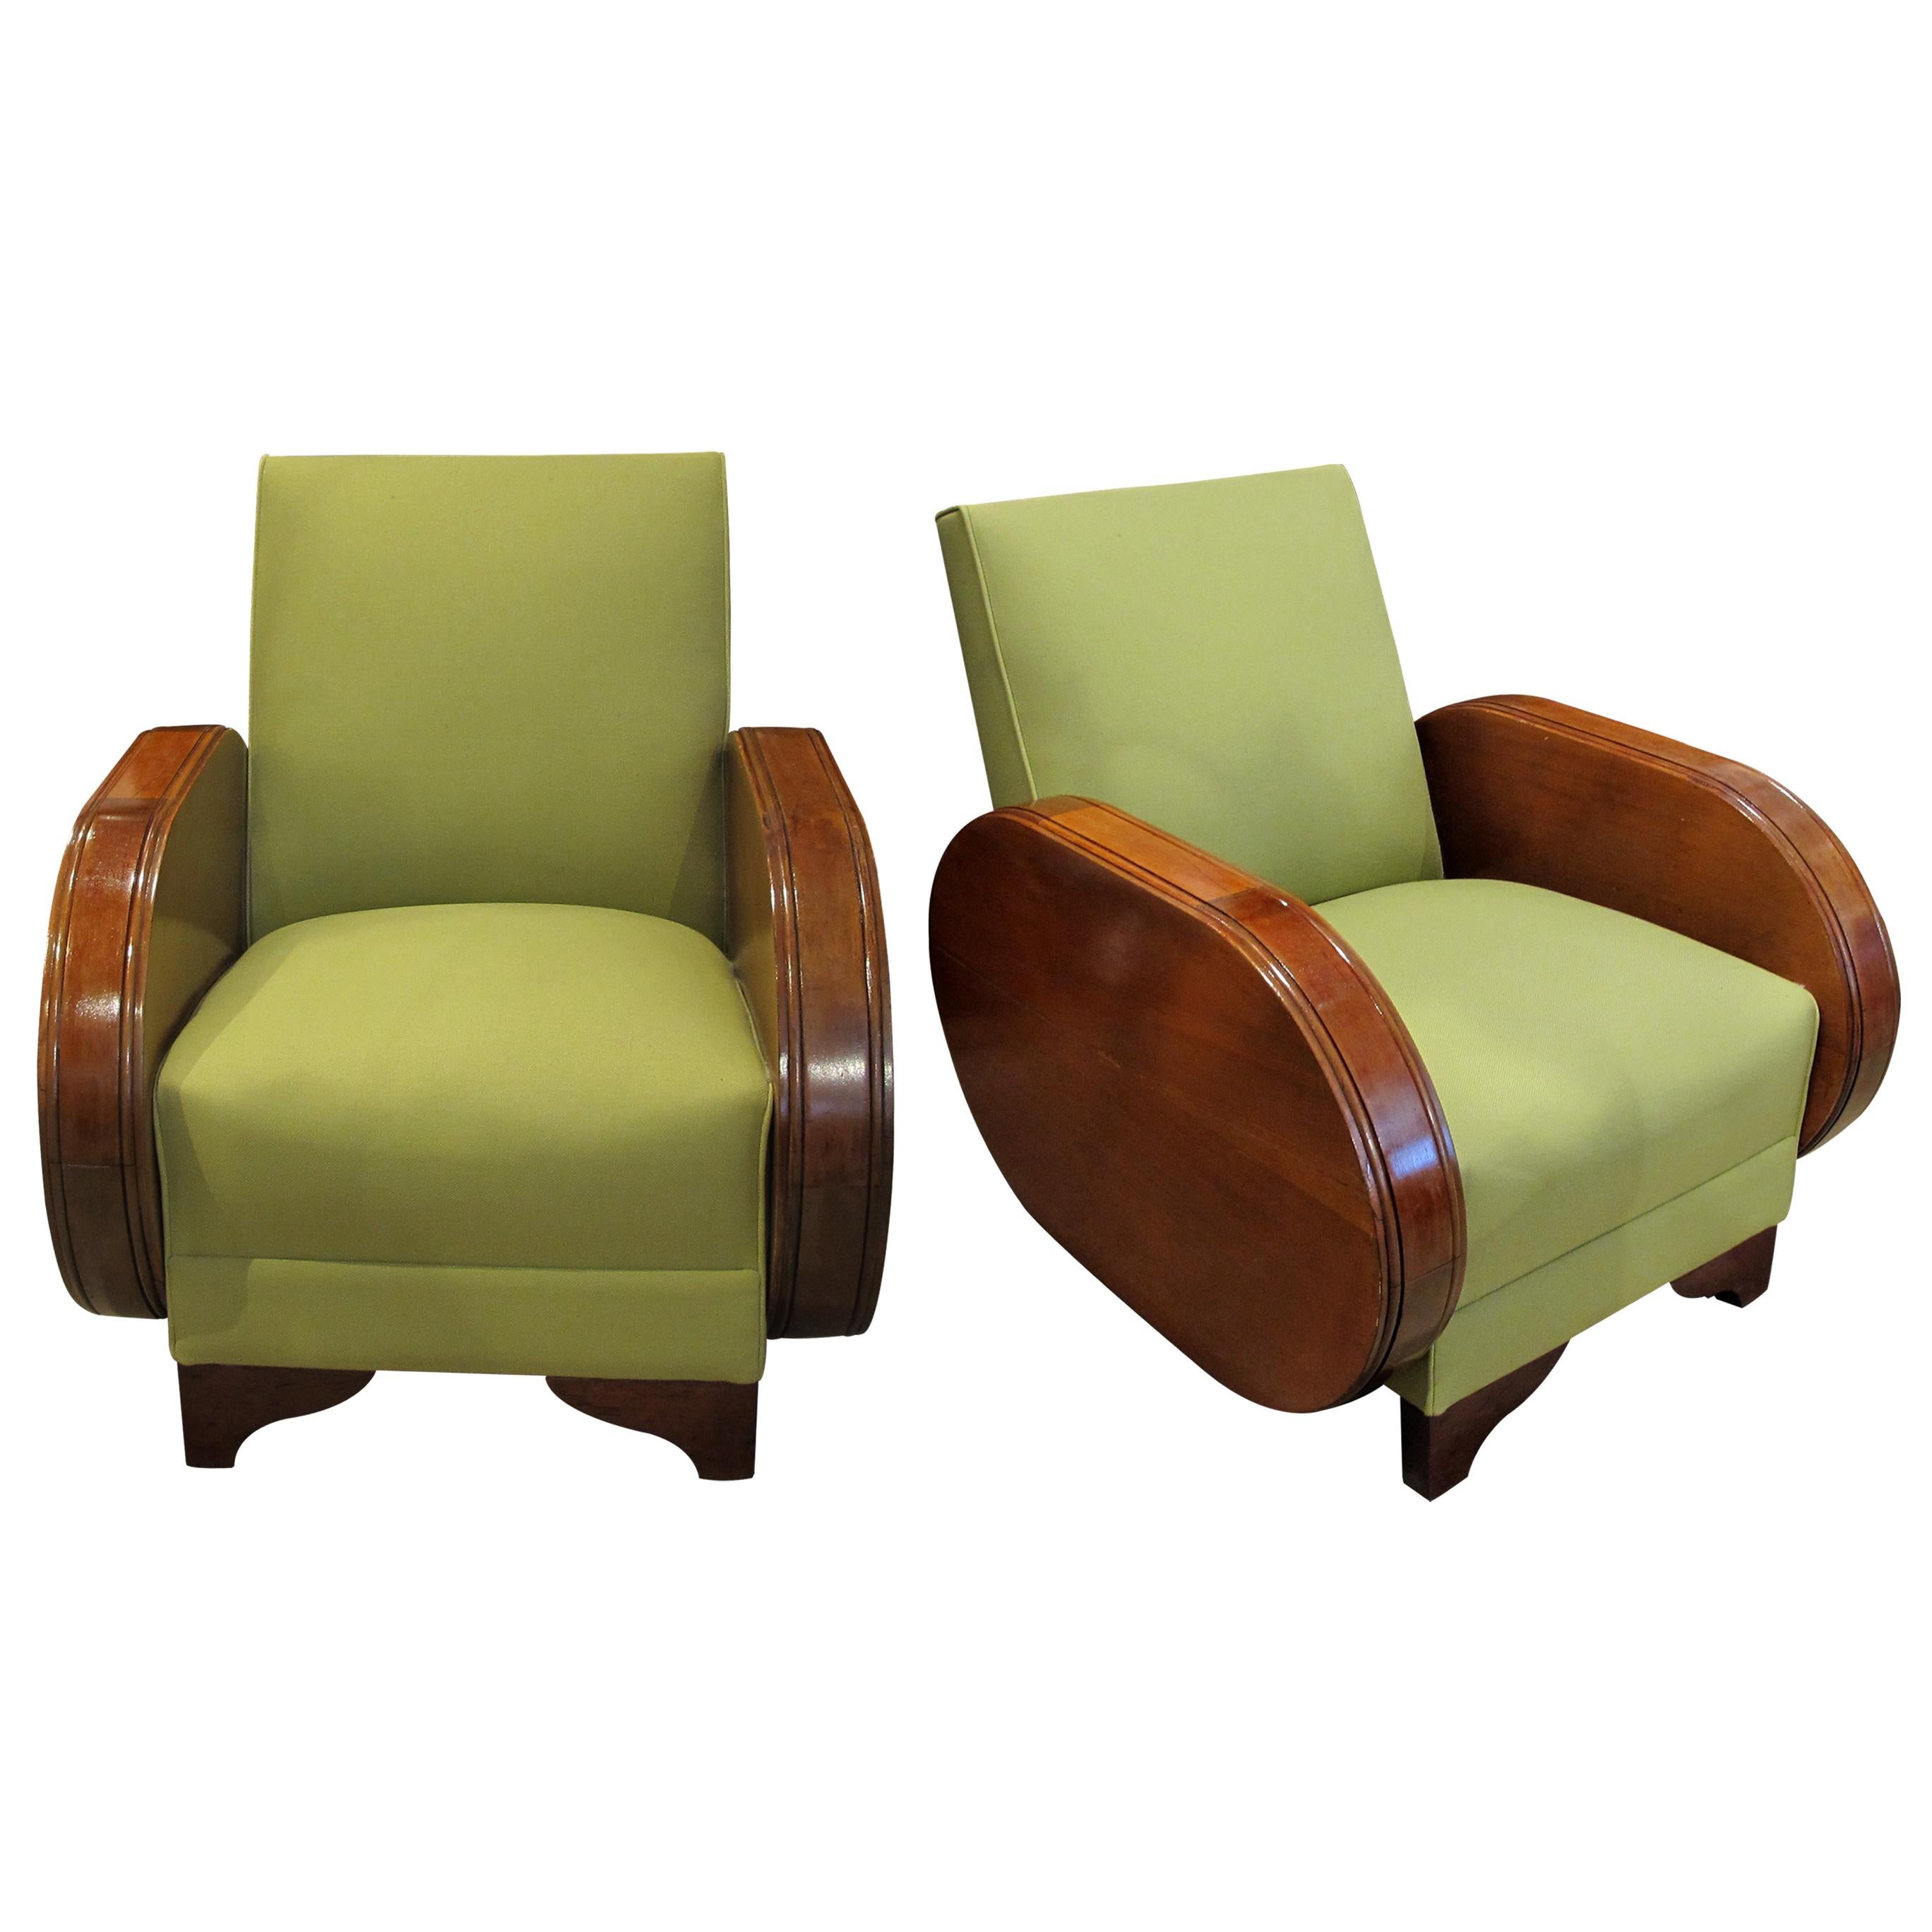 A pair of stylish and comfortable 1930s Art Deco Walnut armchairs with beautiful curved armrests and solid backrests upholstered in a lime green fabric. You may wish to reupholster them based on your own personal taste and requirements but the